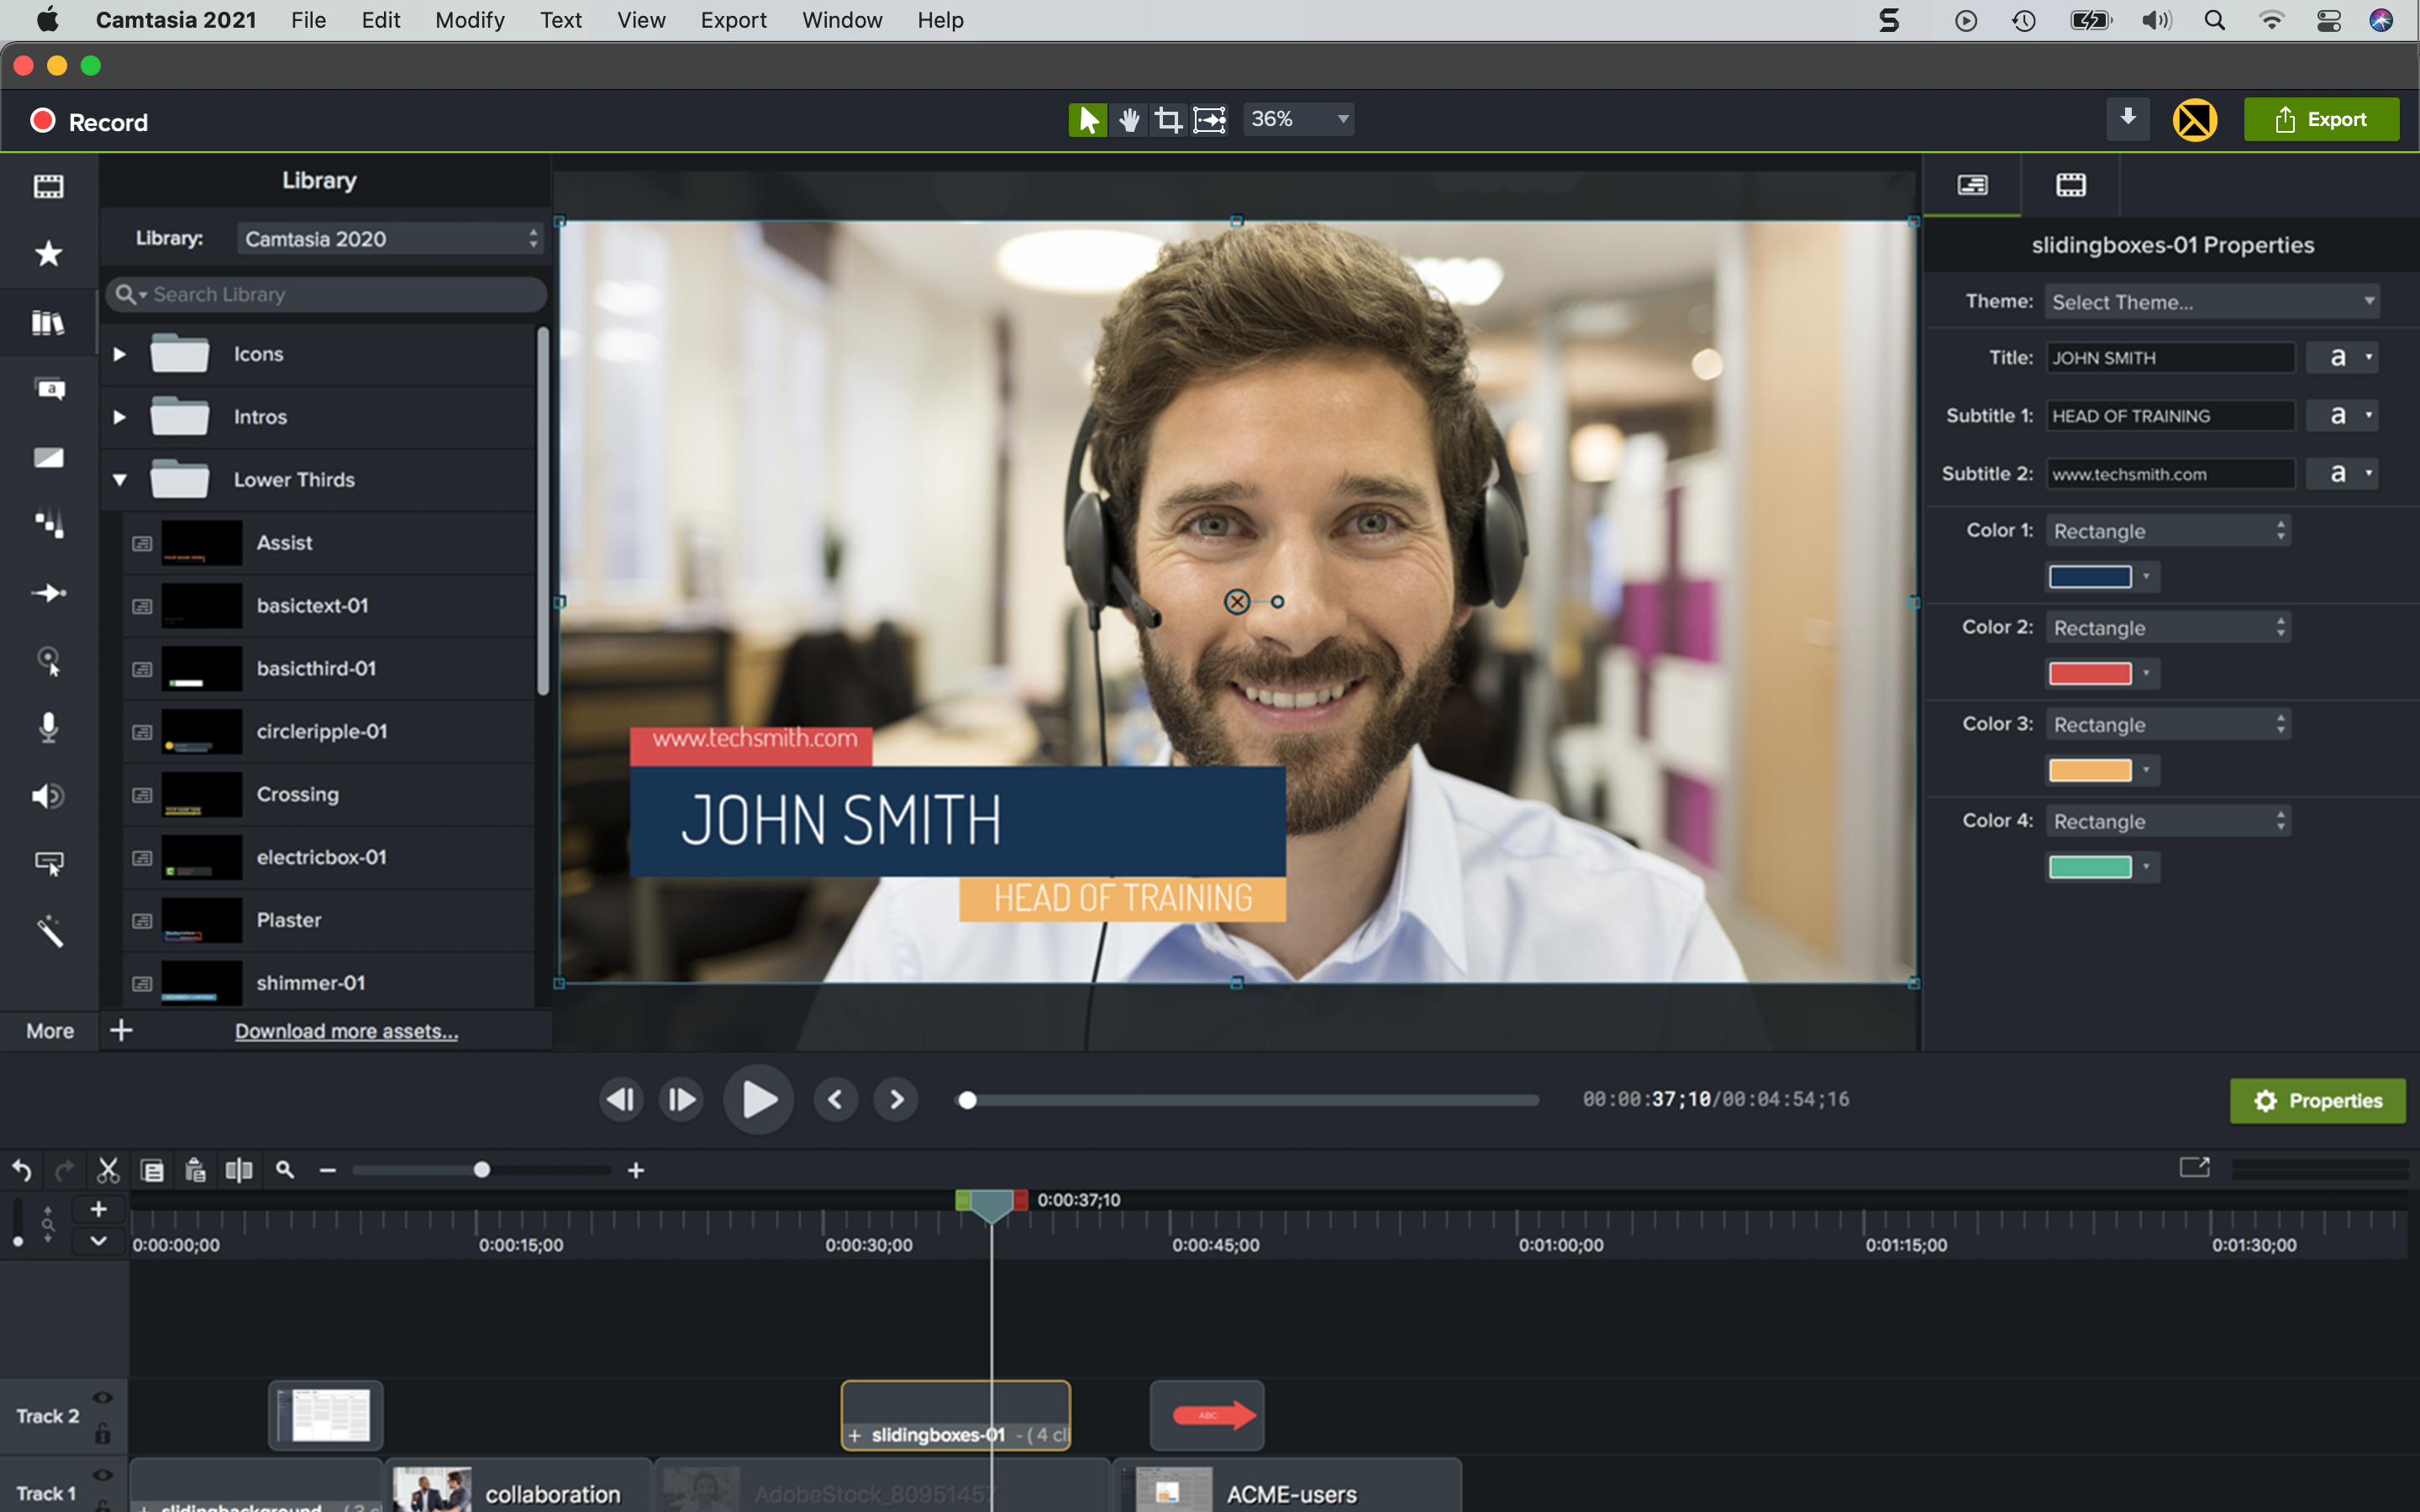 New Camtasia 2021 launched - Grey Matter